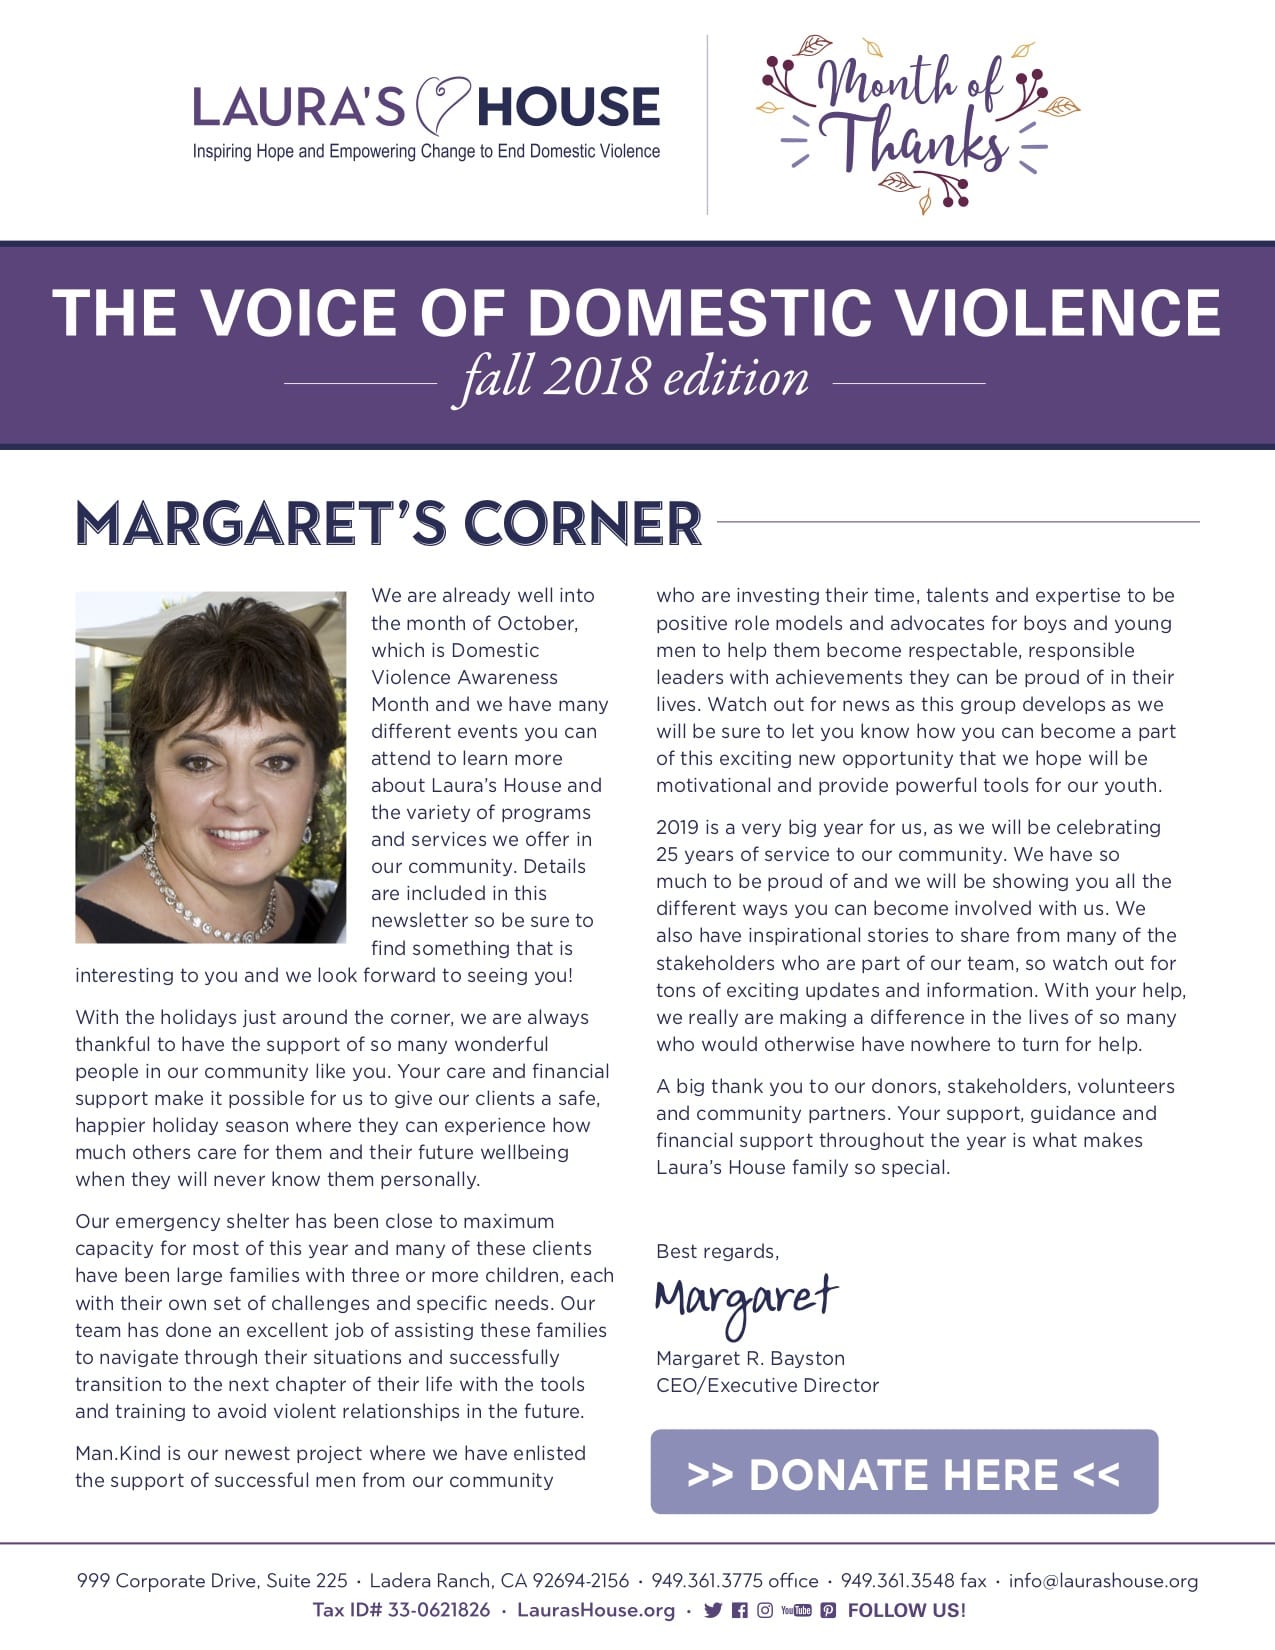 The Voice of Domestic Violence - Fall 2018 edition